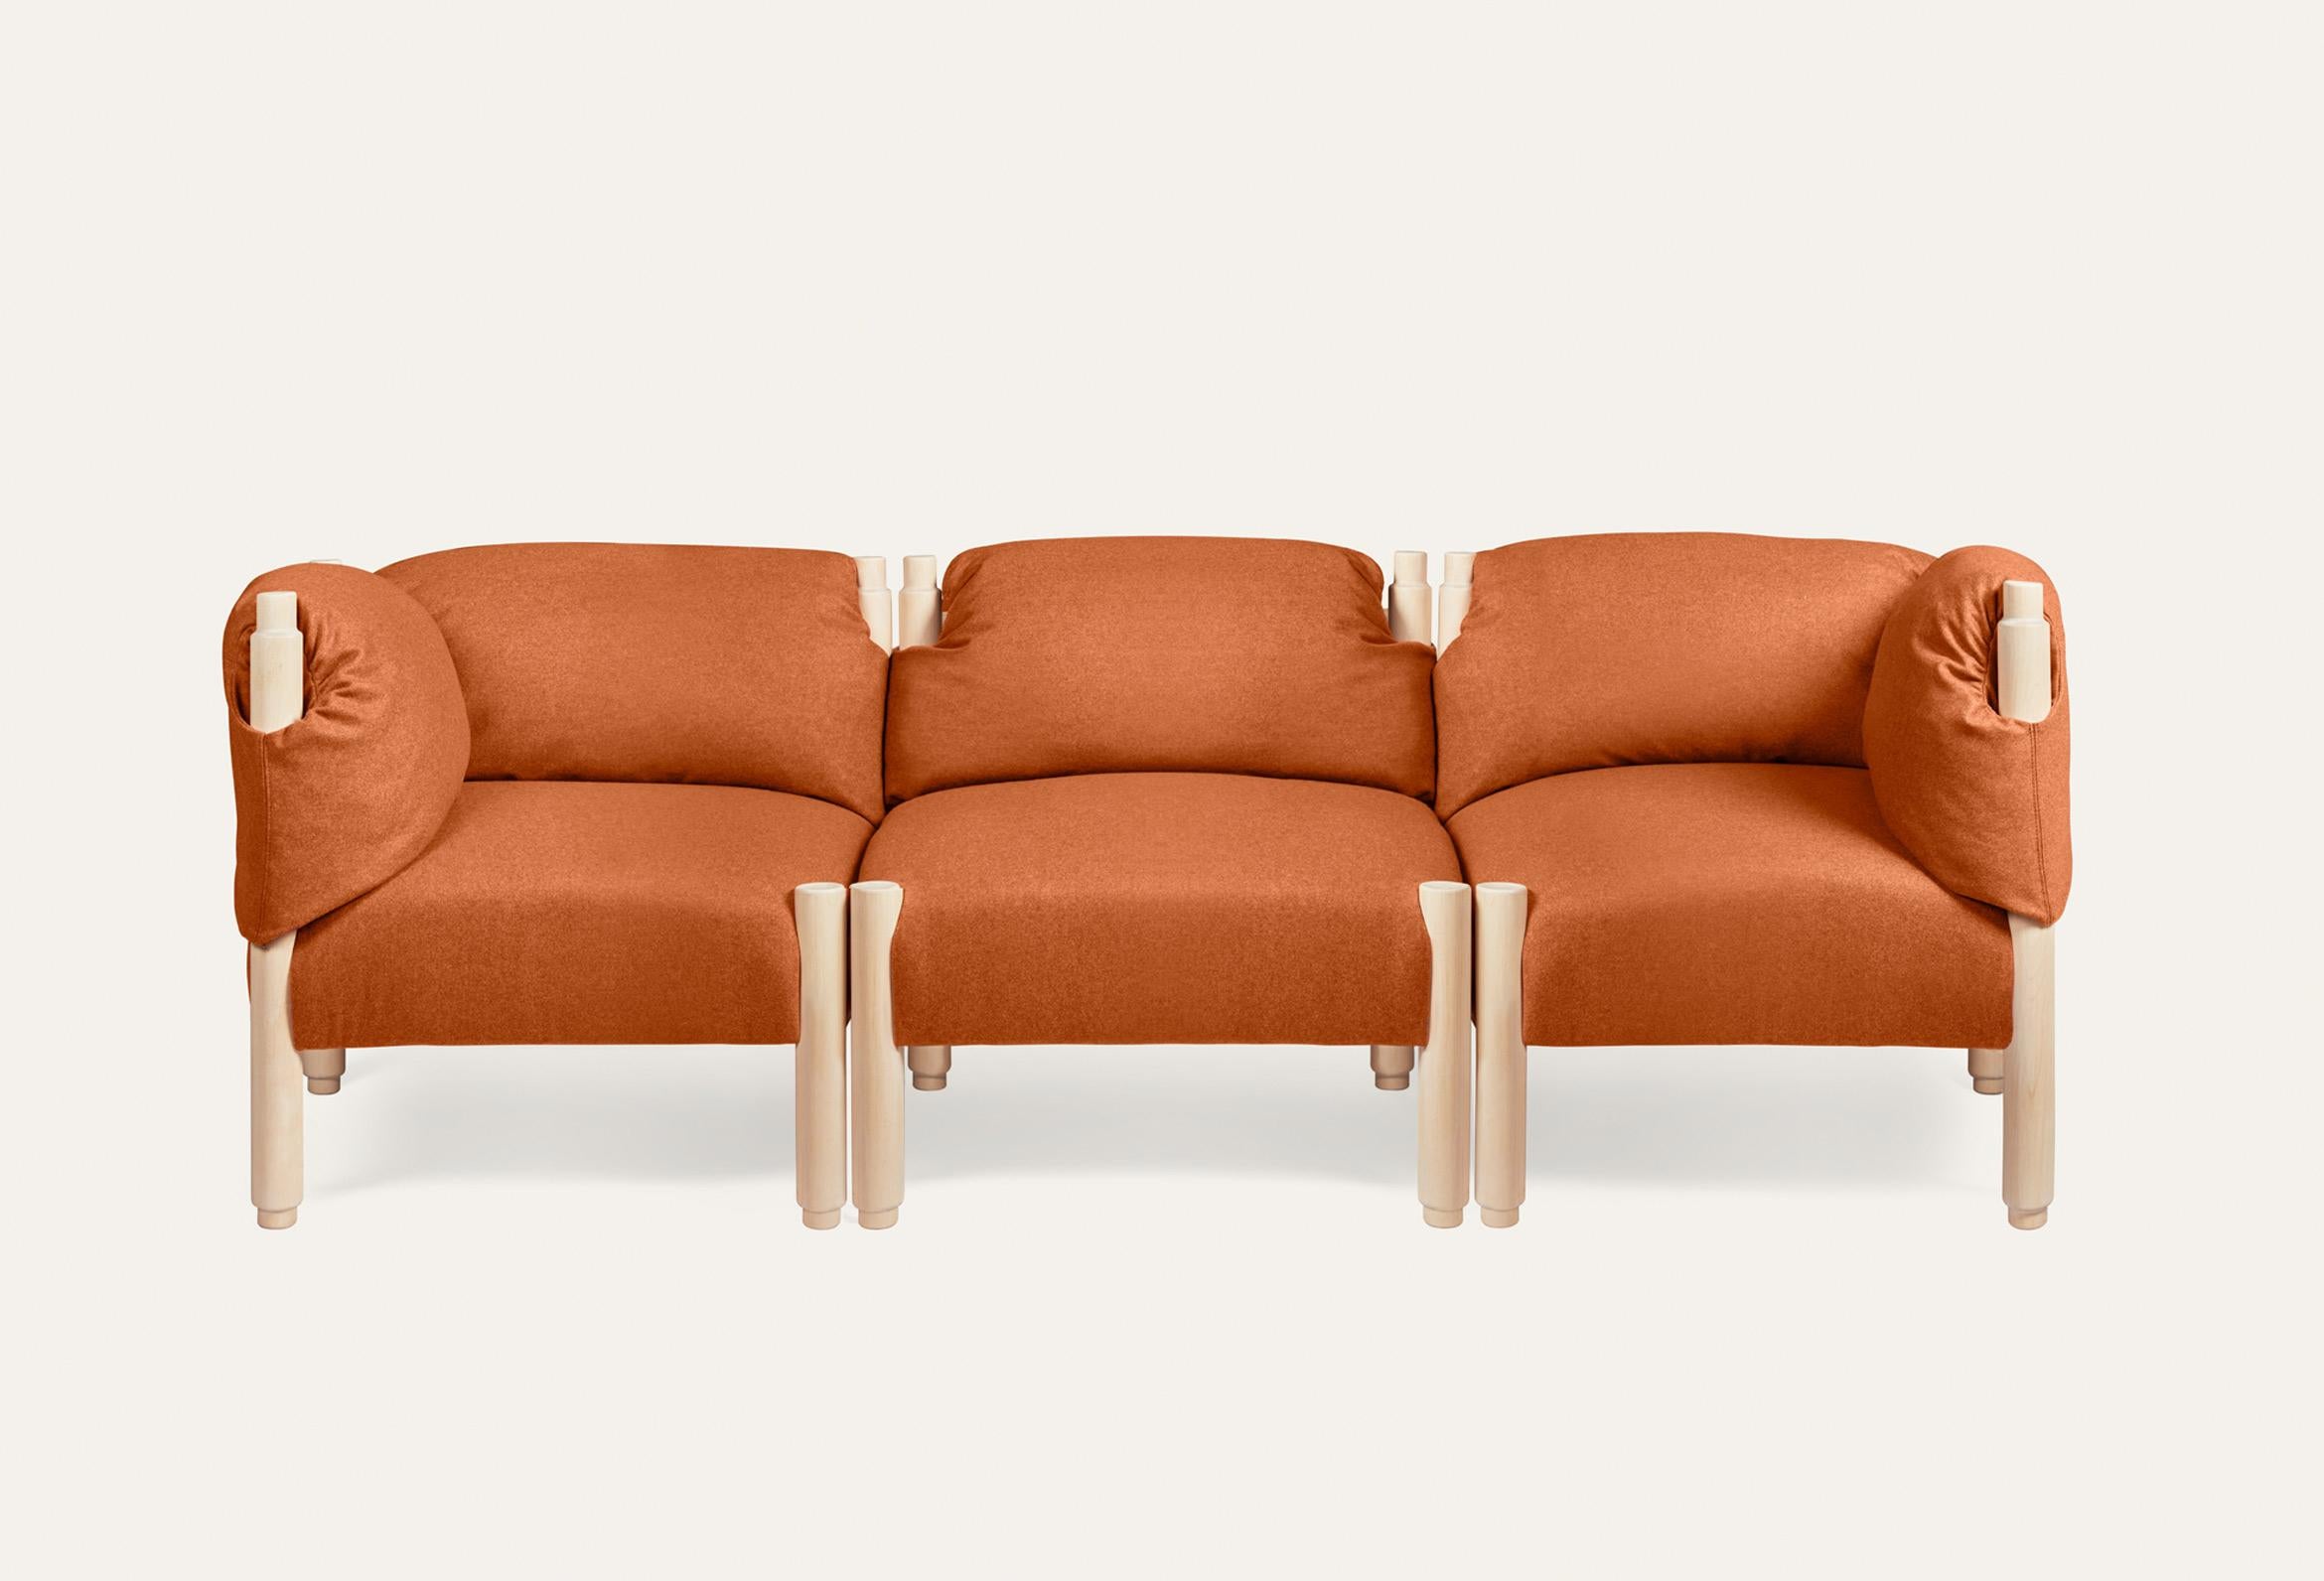 Natural and Orange stand By Me sofa by Storängen Design
Dimensions: D 222 x W 74 x H 73 x SH 42 cm
Materials: birch wood, fabric.
Available in other colors and fabrics. With fixed back or pillows.
Available in different module convinations: